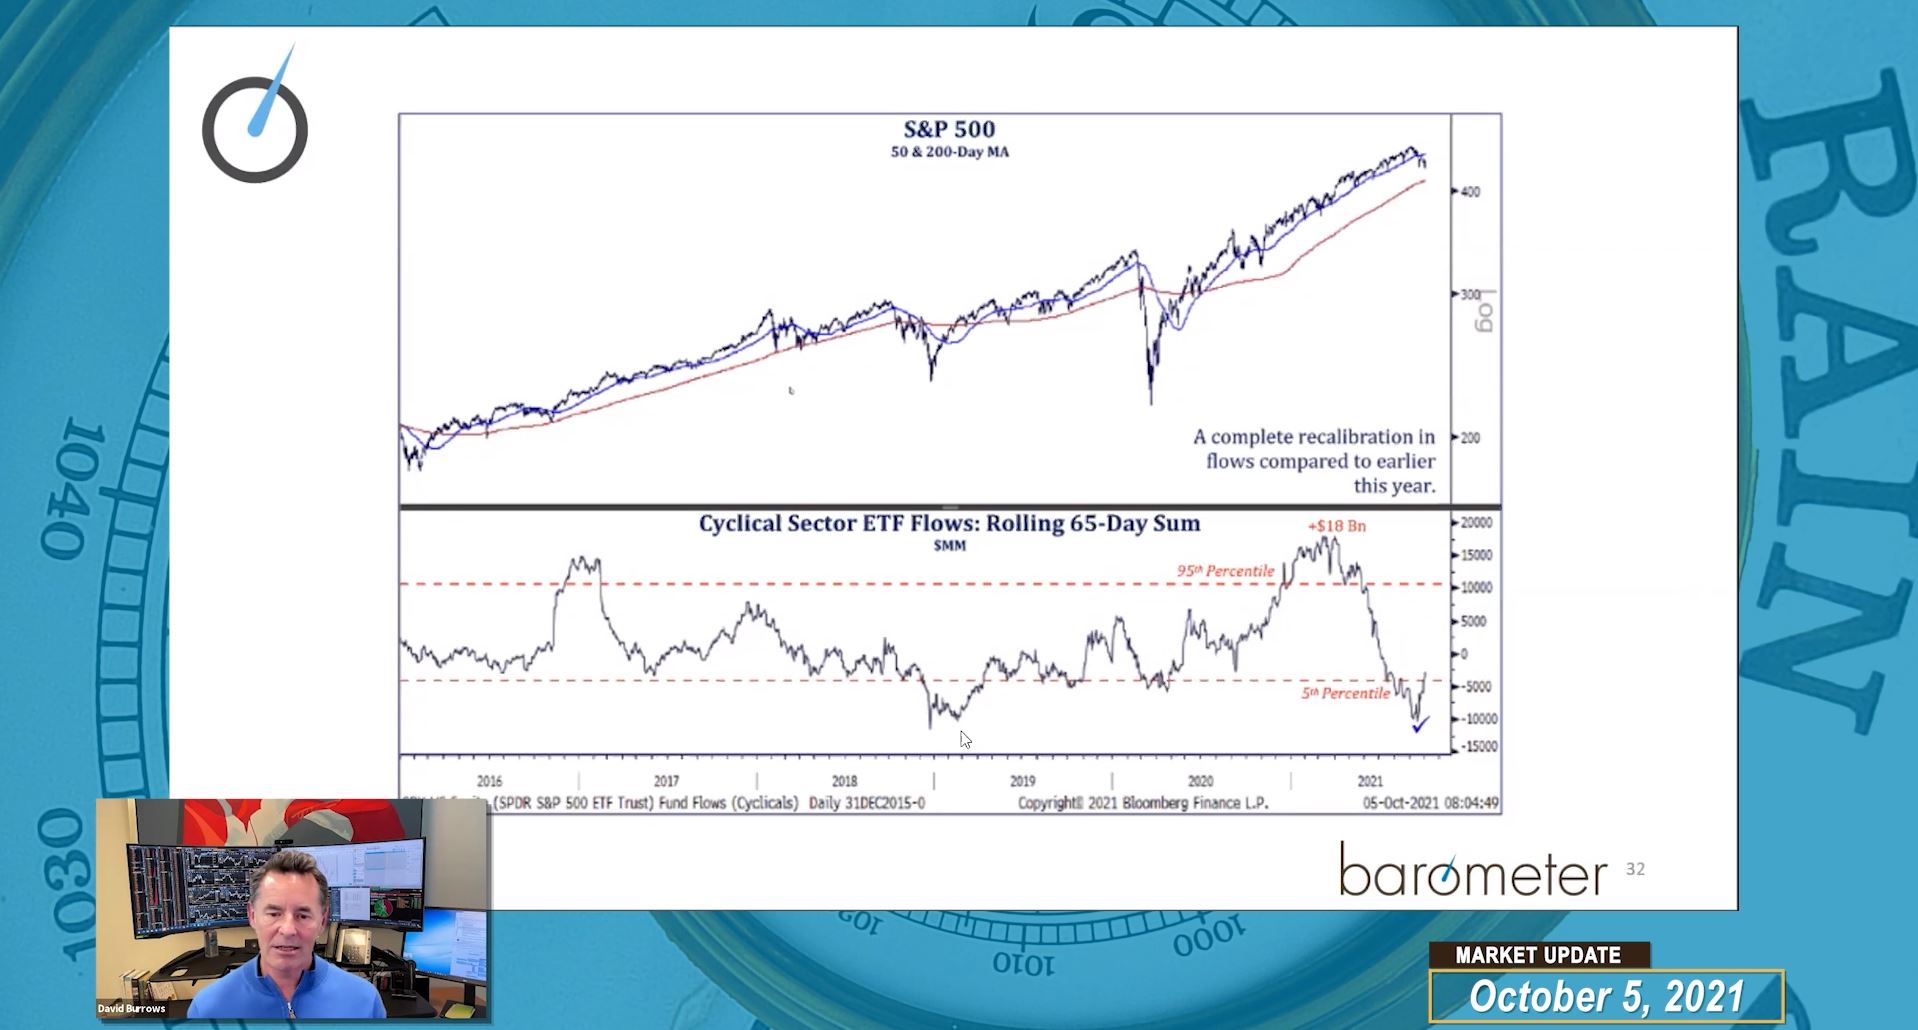 Market Update (Video) – David Burrows Discusses High Frequency Data, Reflation Improving, Risk Appetite Indicators and Recent Market Activity